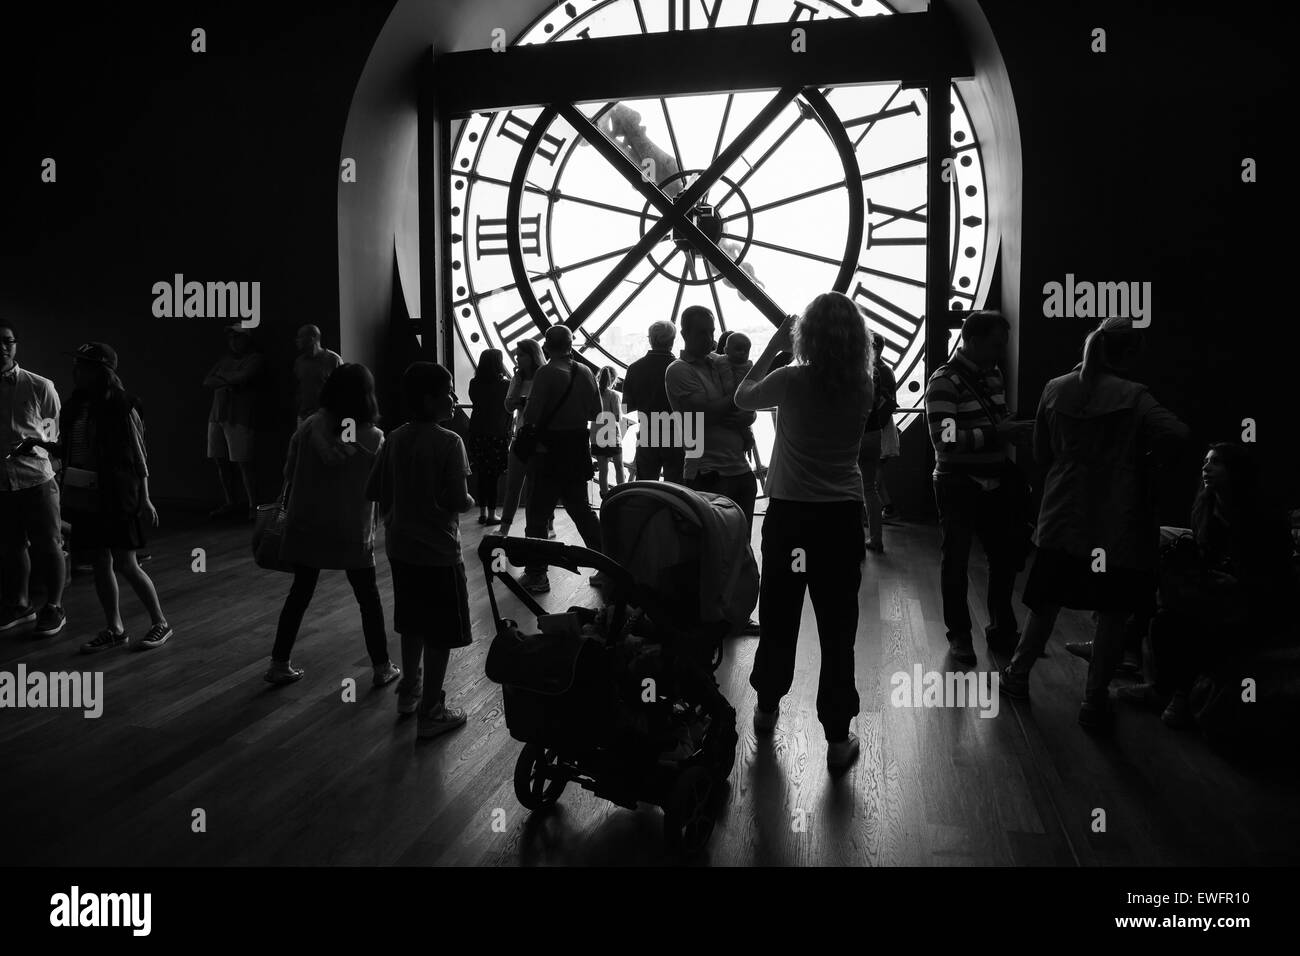 Paris, France - August 10, 2014: Interior with famous ancient clock window in Orsay Museum, tourists and visitors are taking pho Stock Photo